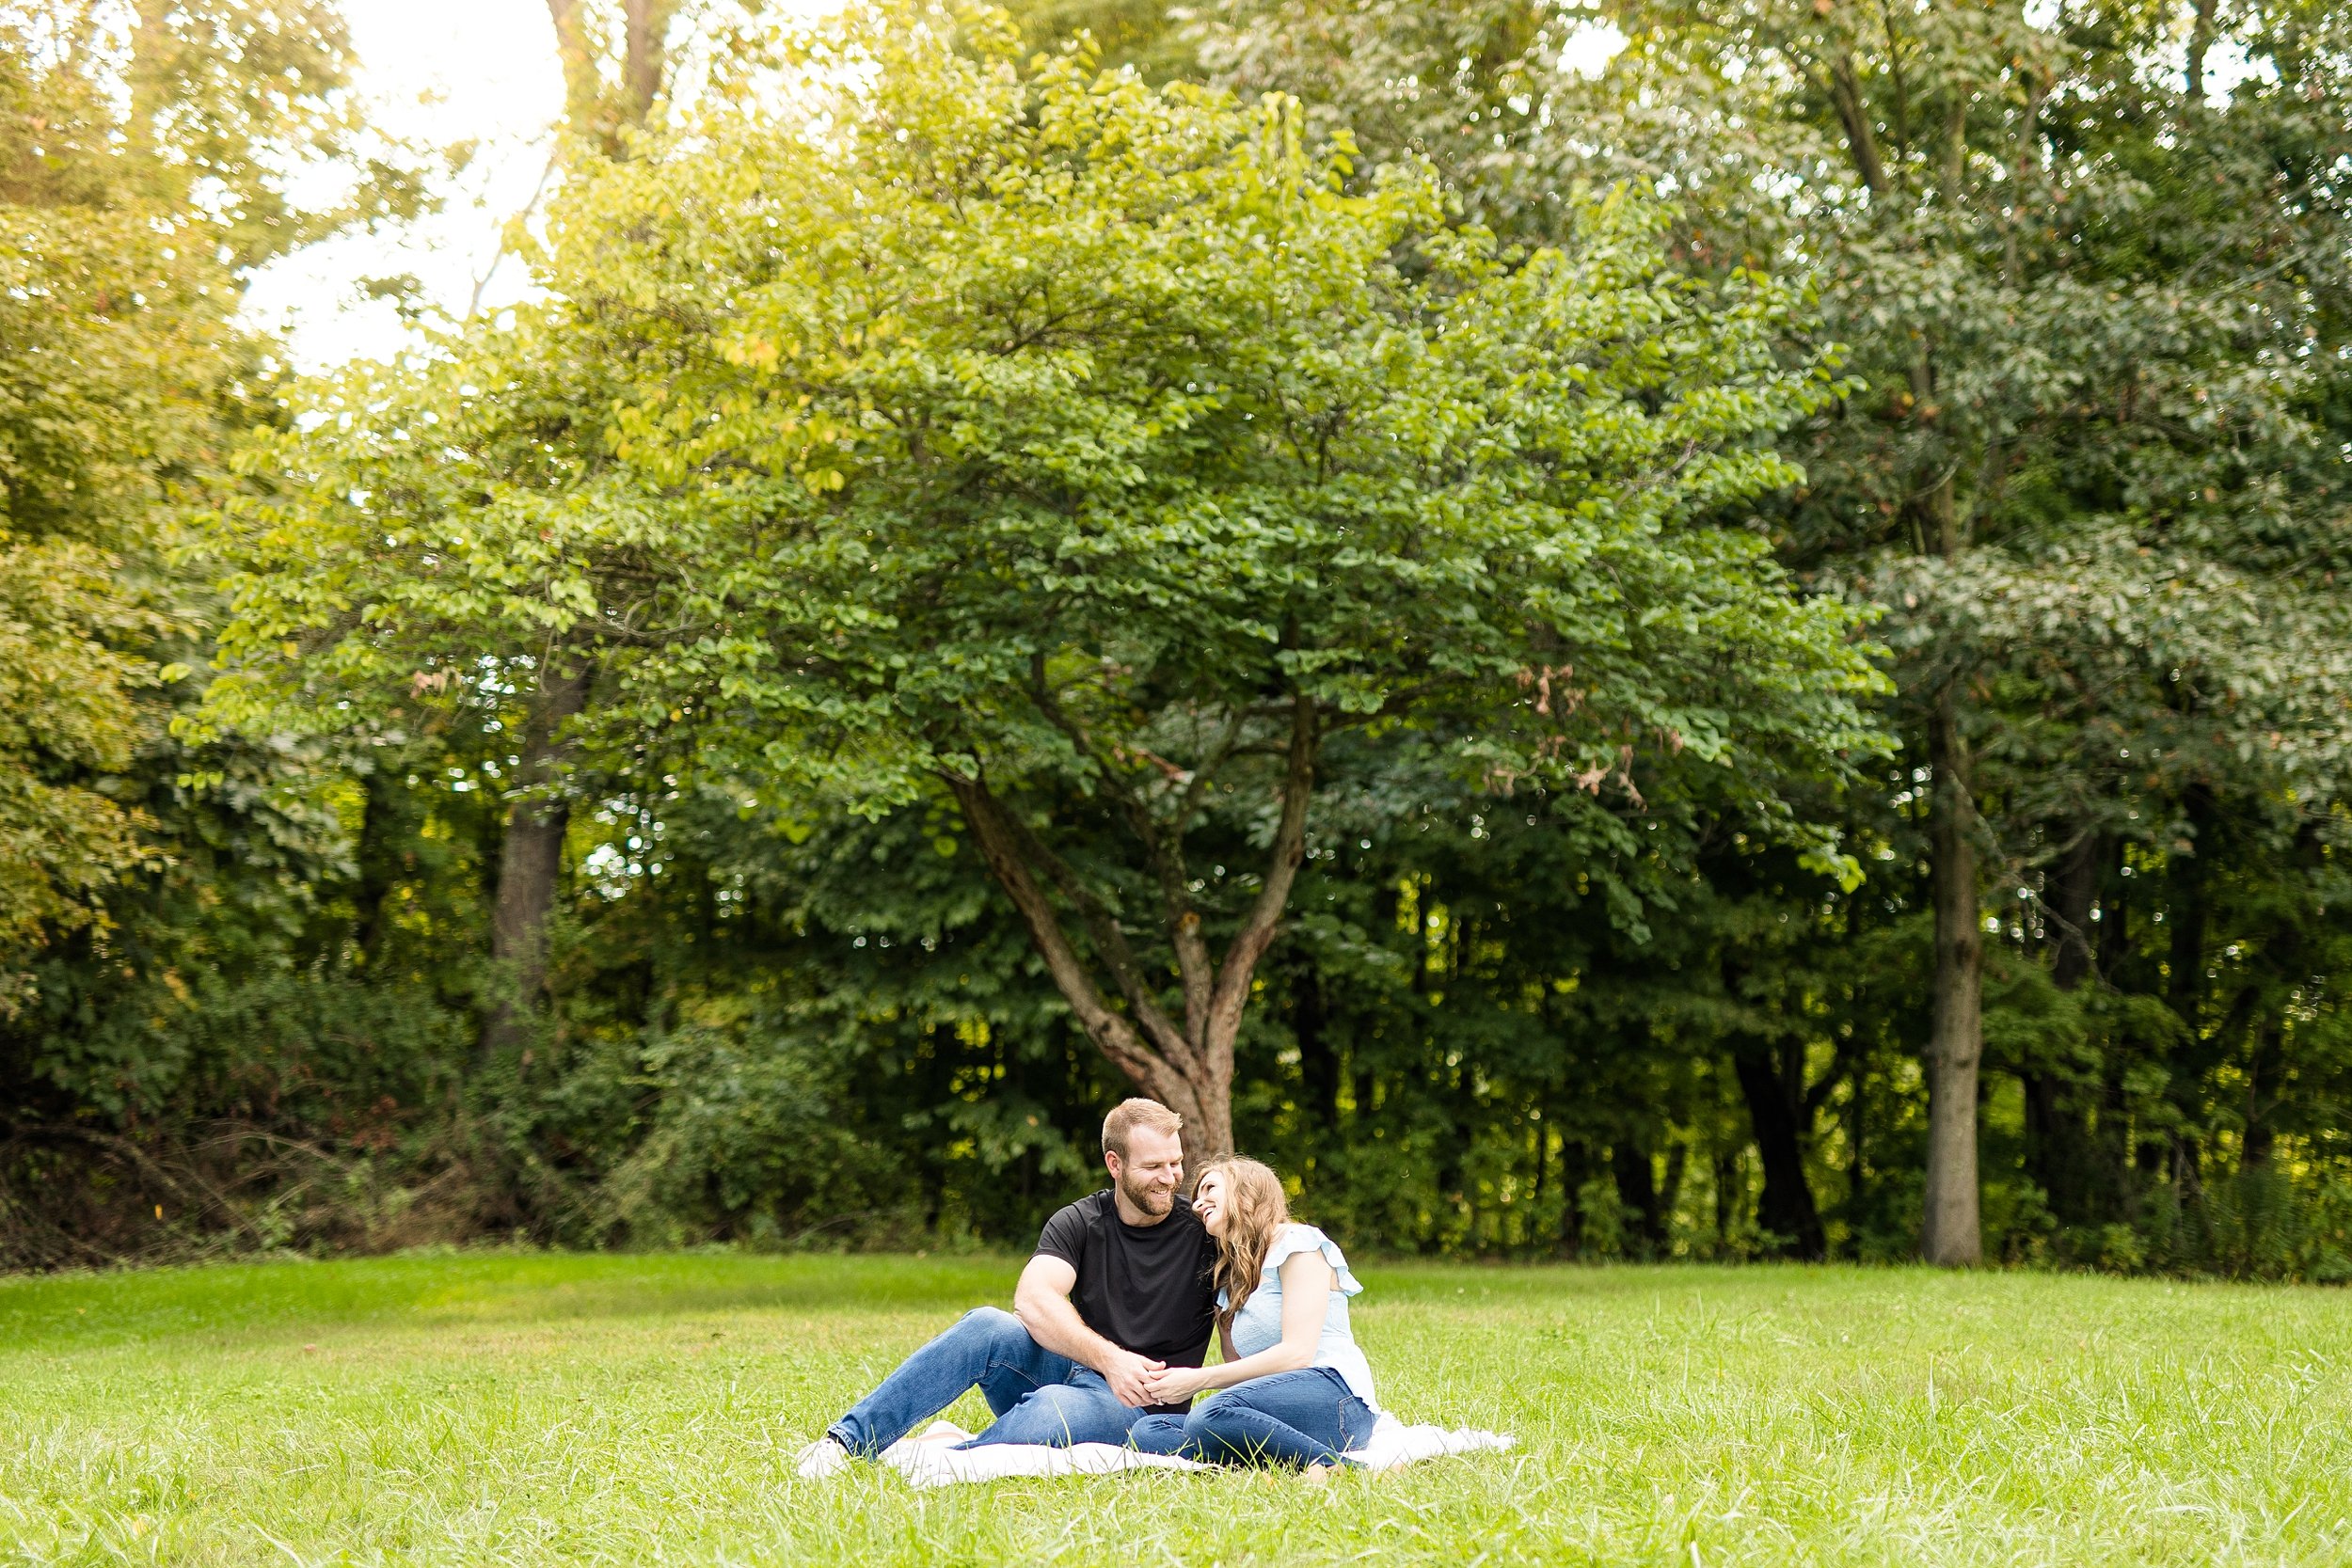 pittsburgh wedding photographer, moraine state park engagement photos, mcconnells mill engagement photos, locations near cranberry township for pictures